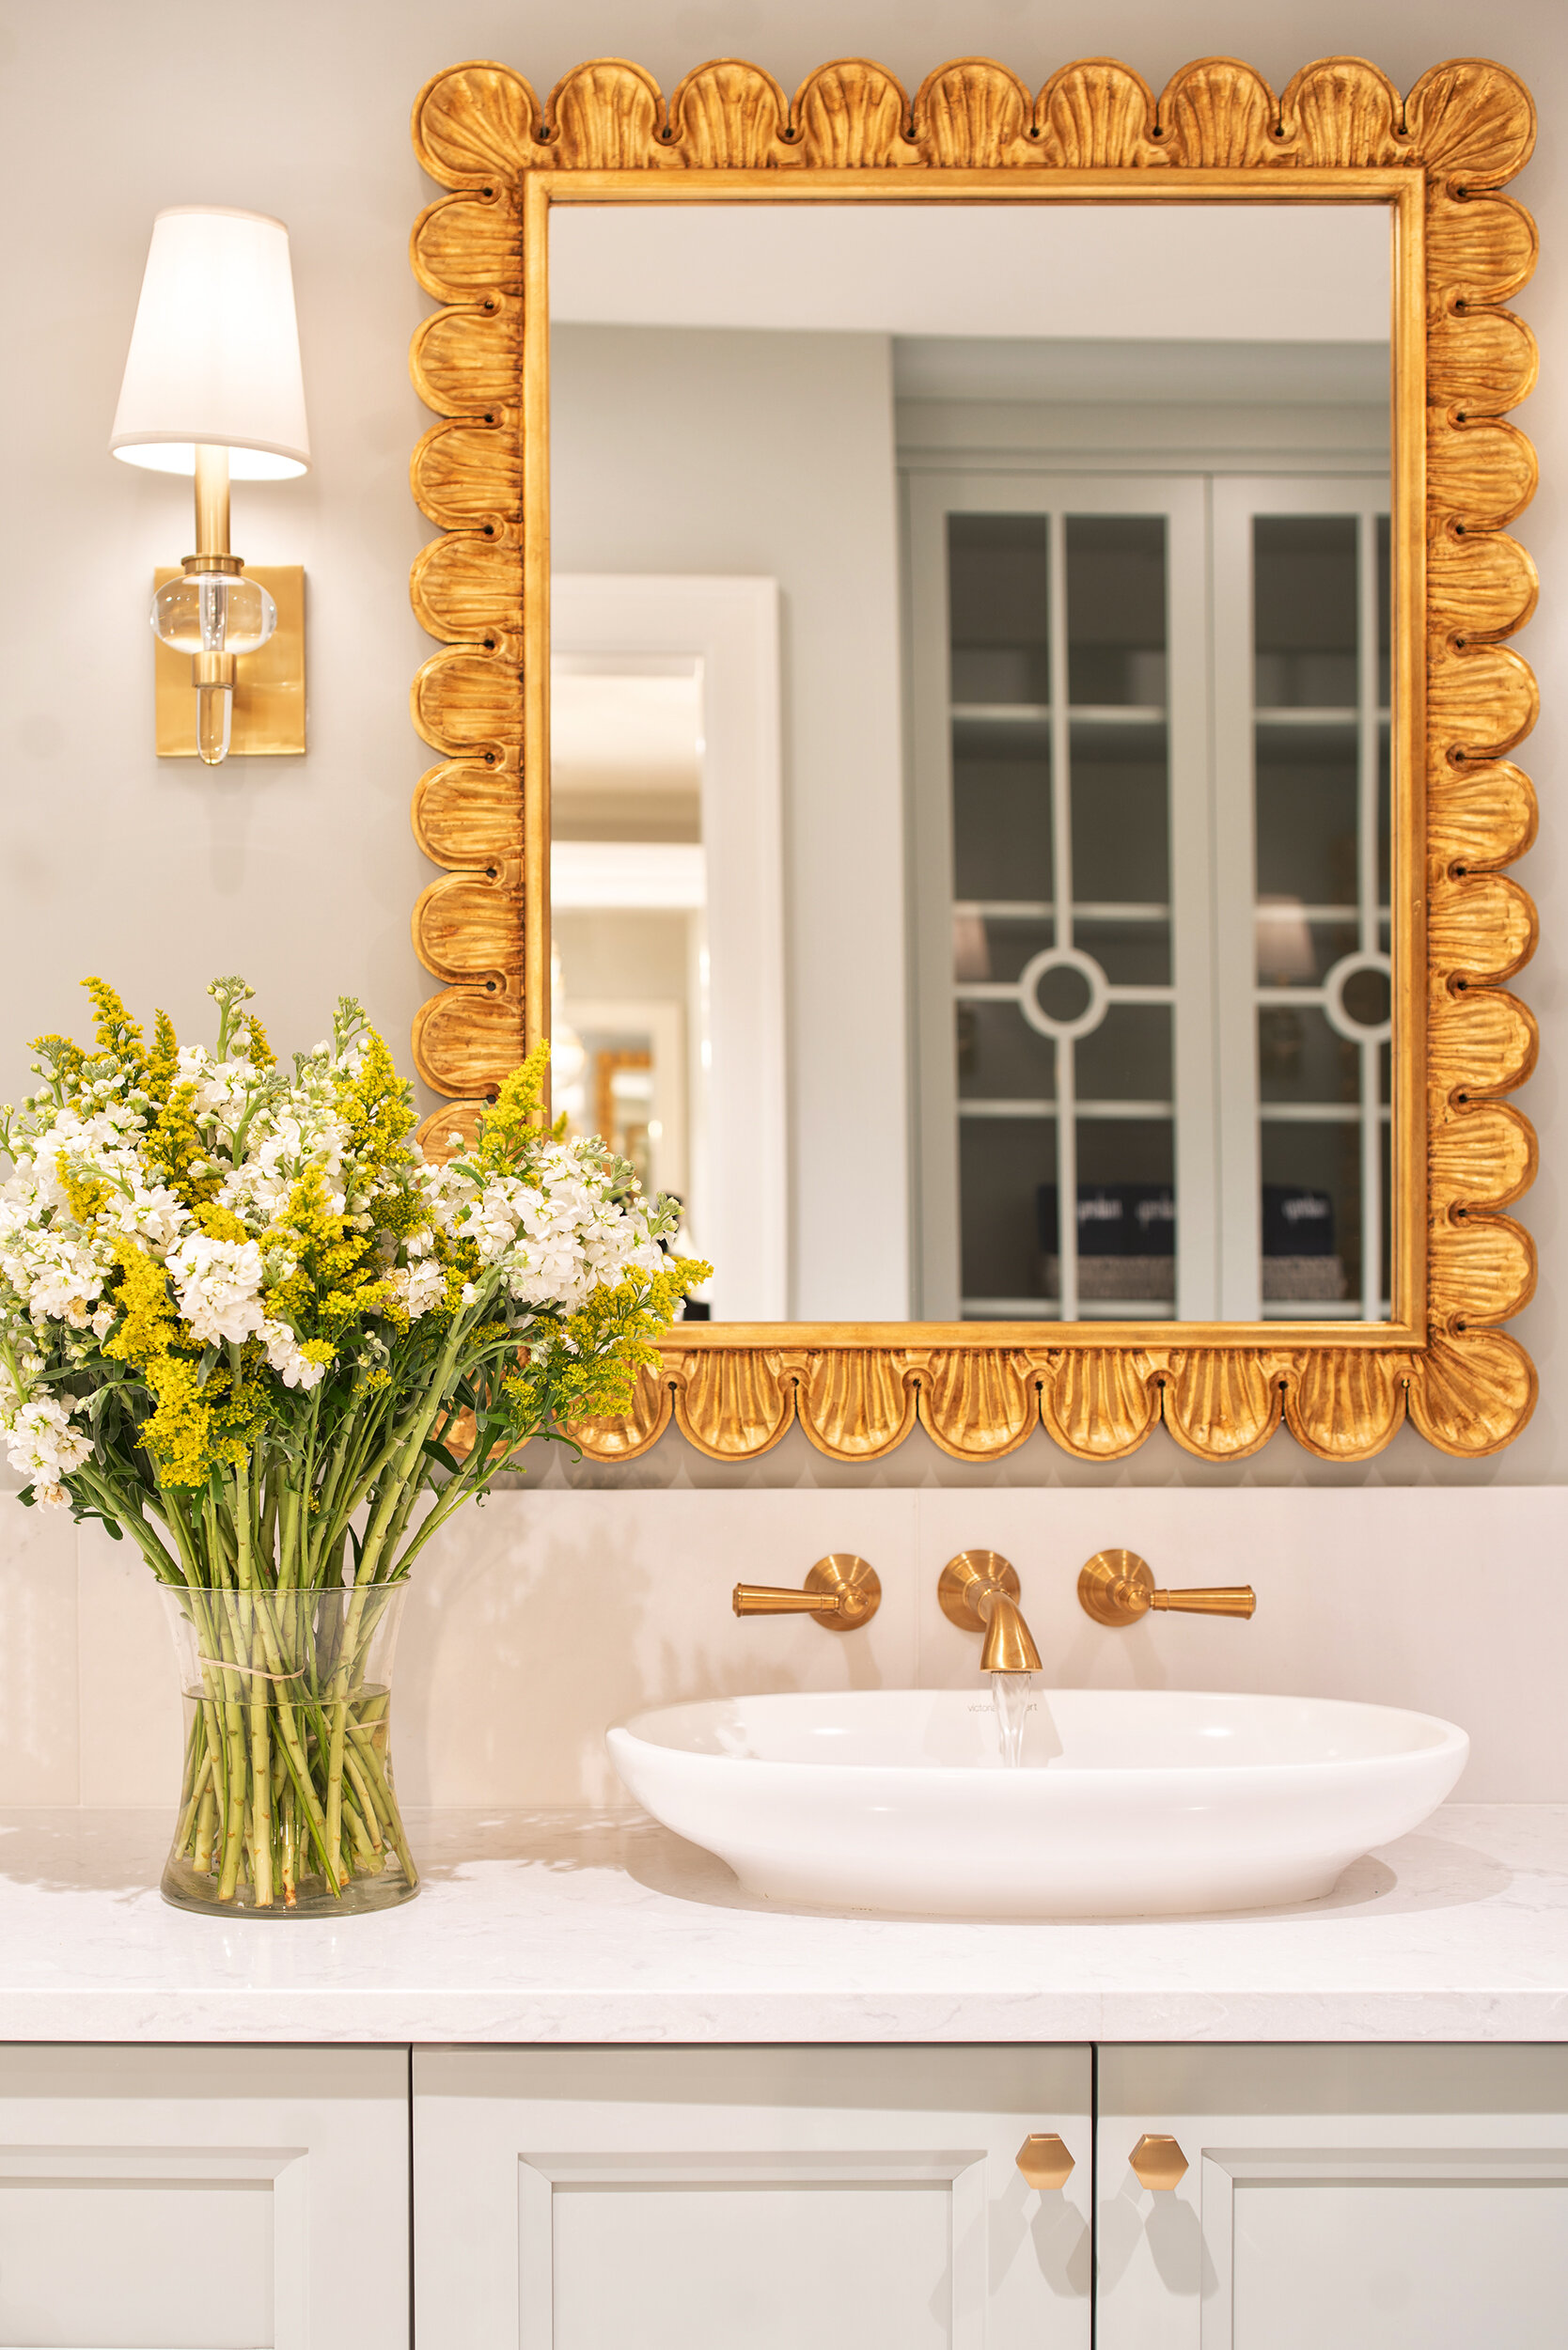 Grey and white bathroom with gold mirror and details